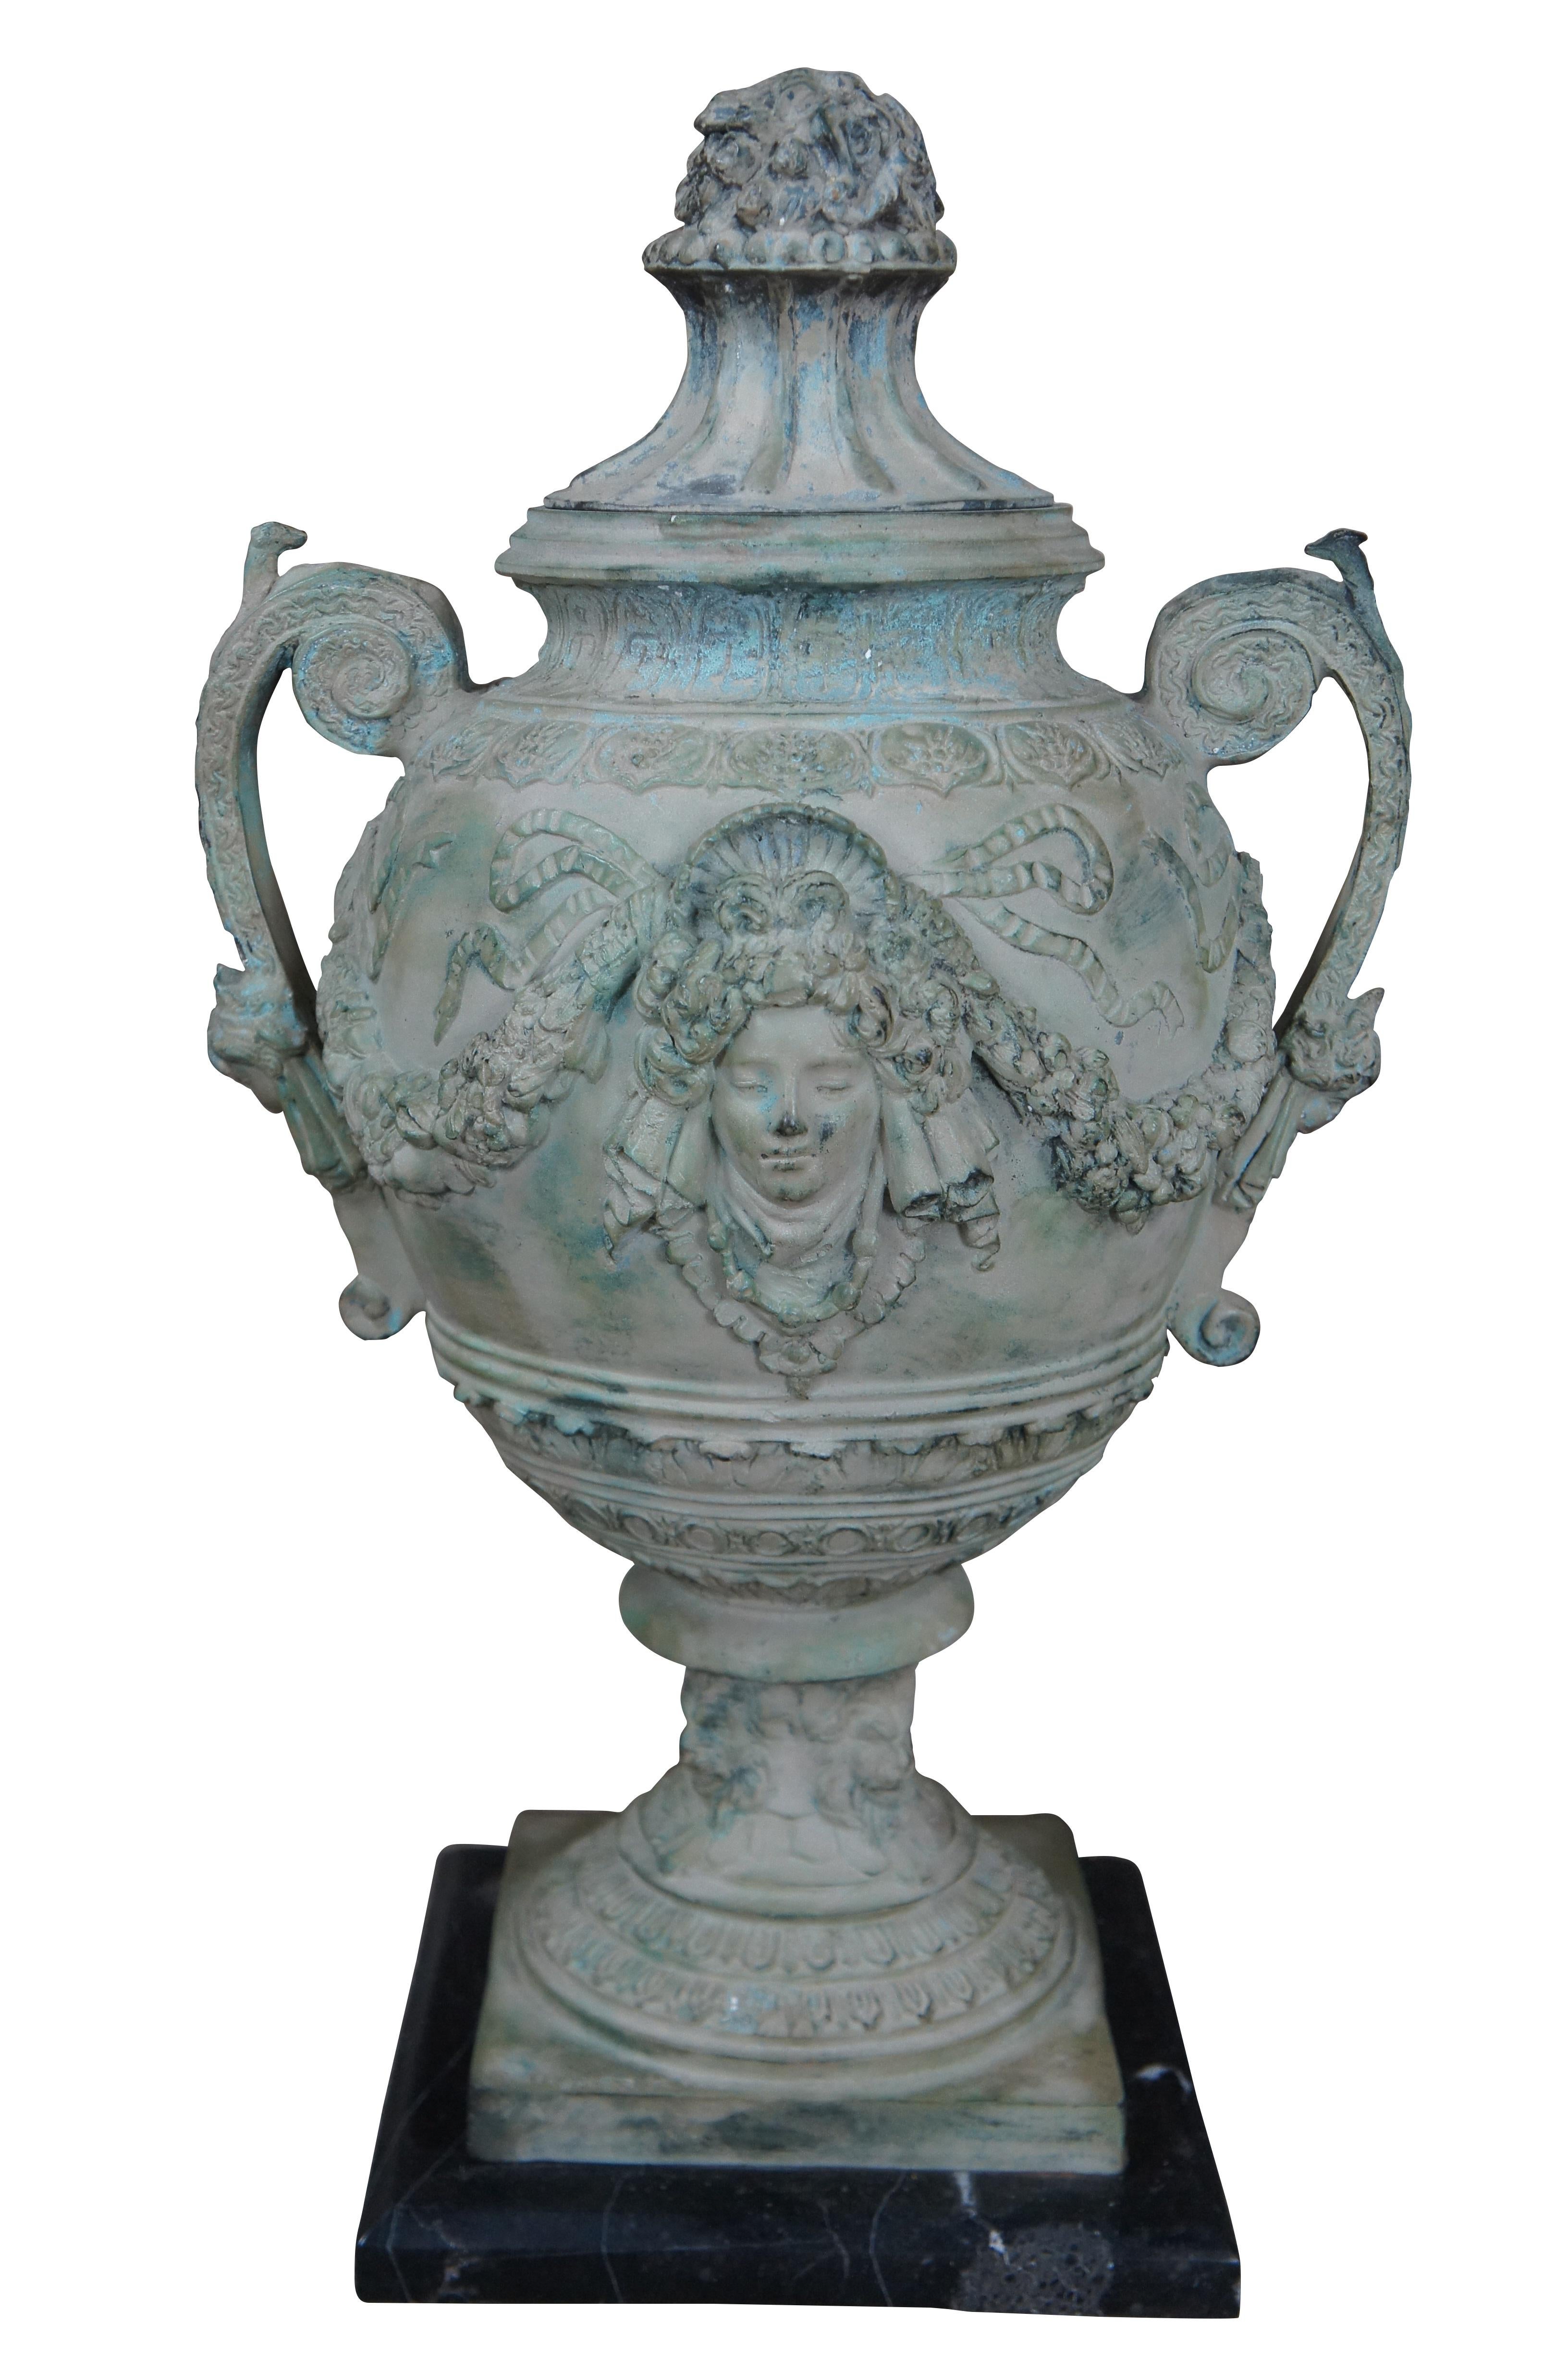 Pair of Neoclassical style patinated verdigris bronze covered urns on stands. Beautifully designed with figures, floral swags, and lions heads around the base. Marked A. Moreau. Each urn is mounted to a black and white veined marble plinth. Circa